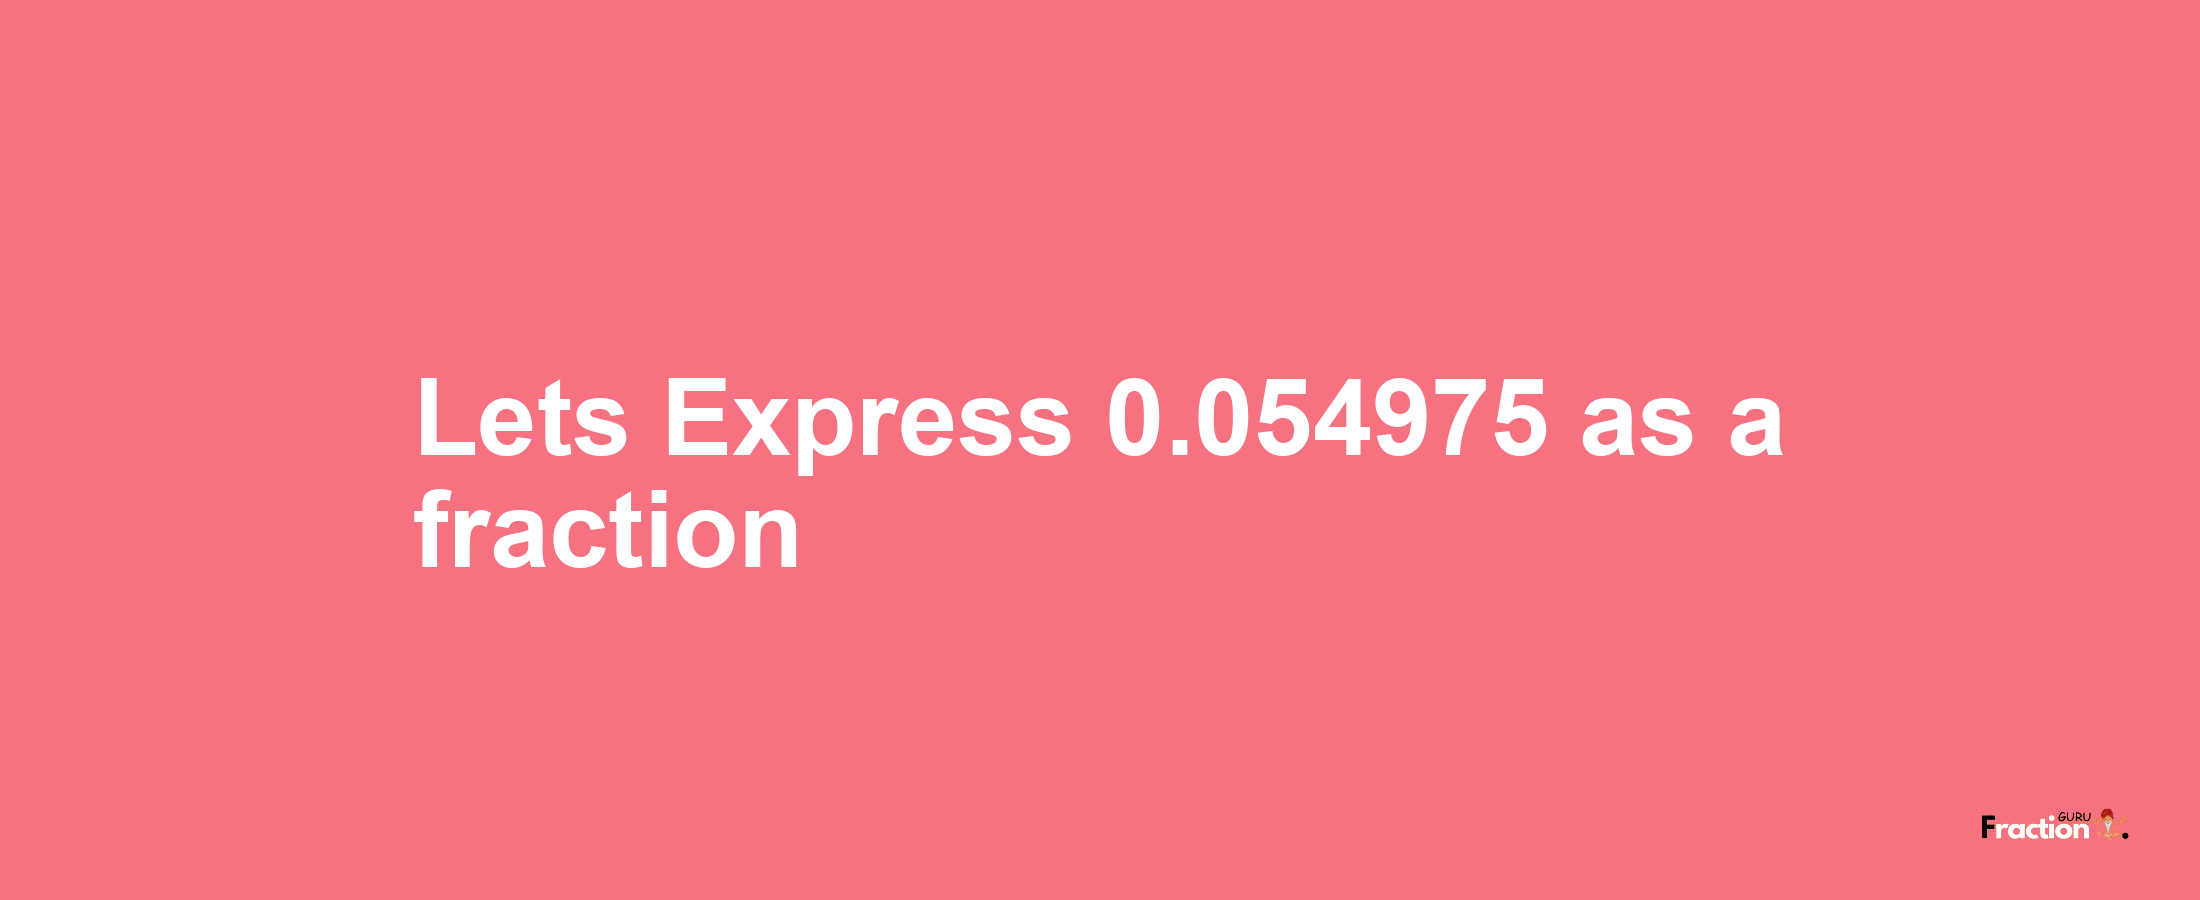 Lets Express 0.054975 as afraction